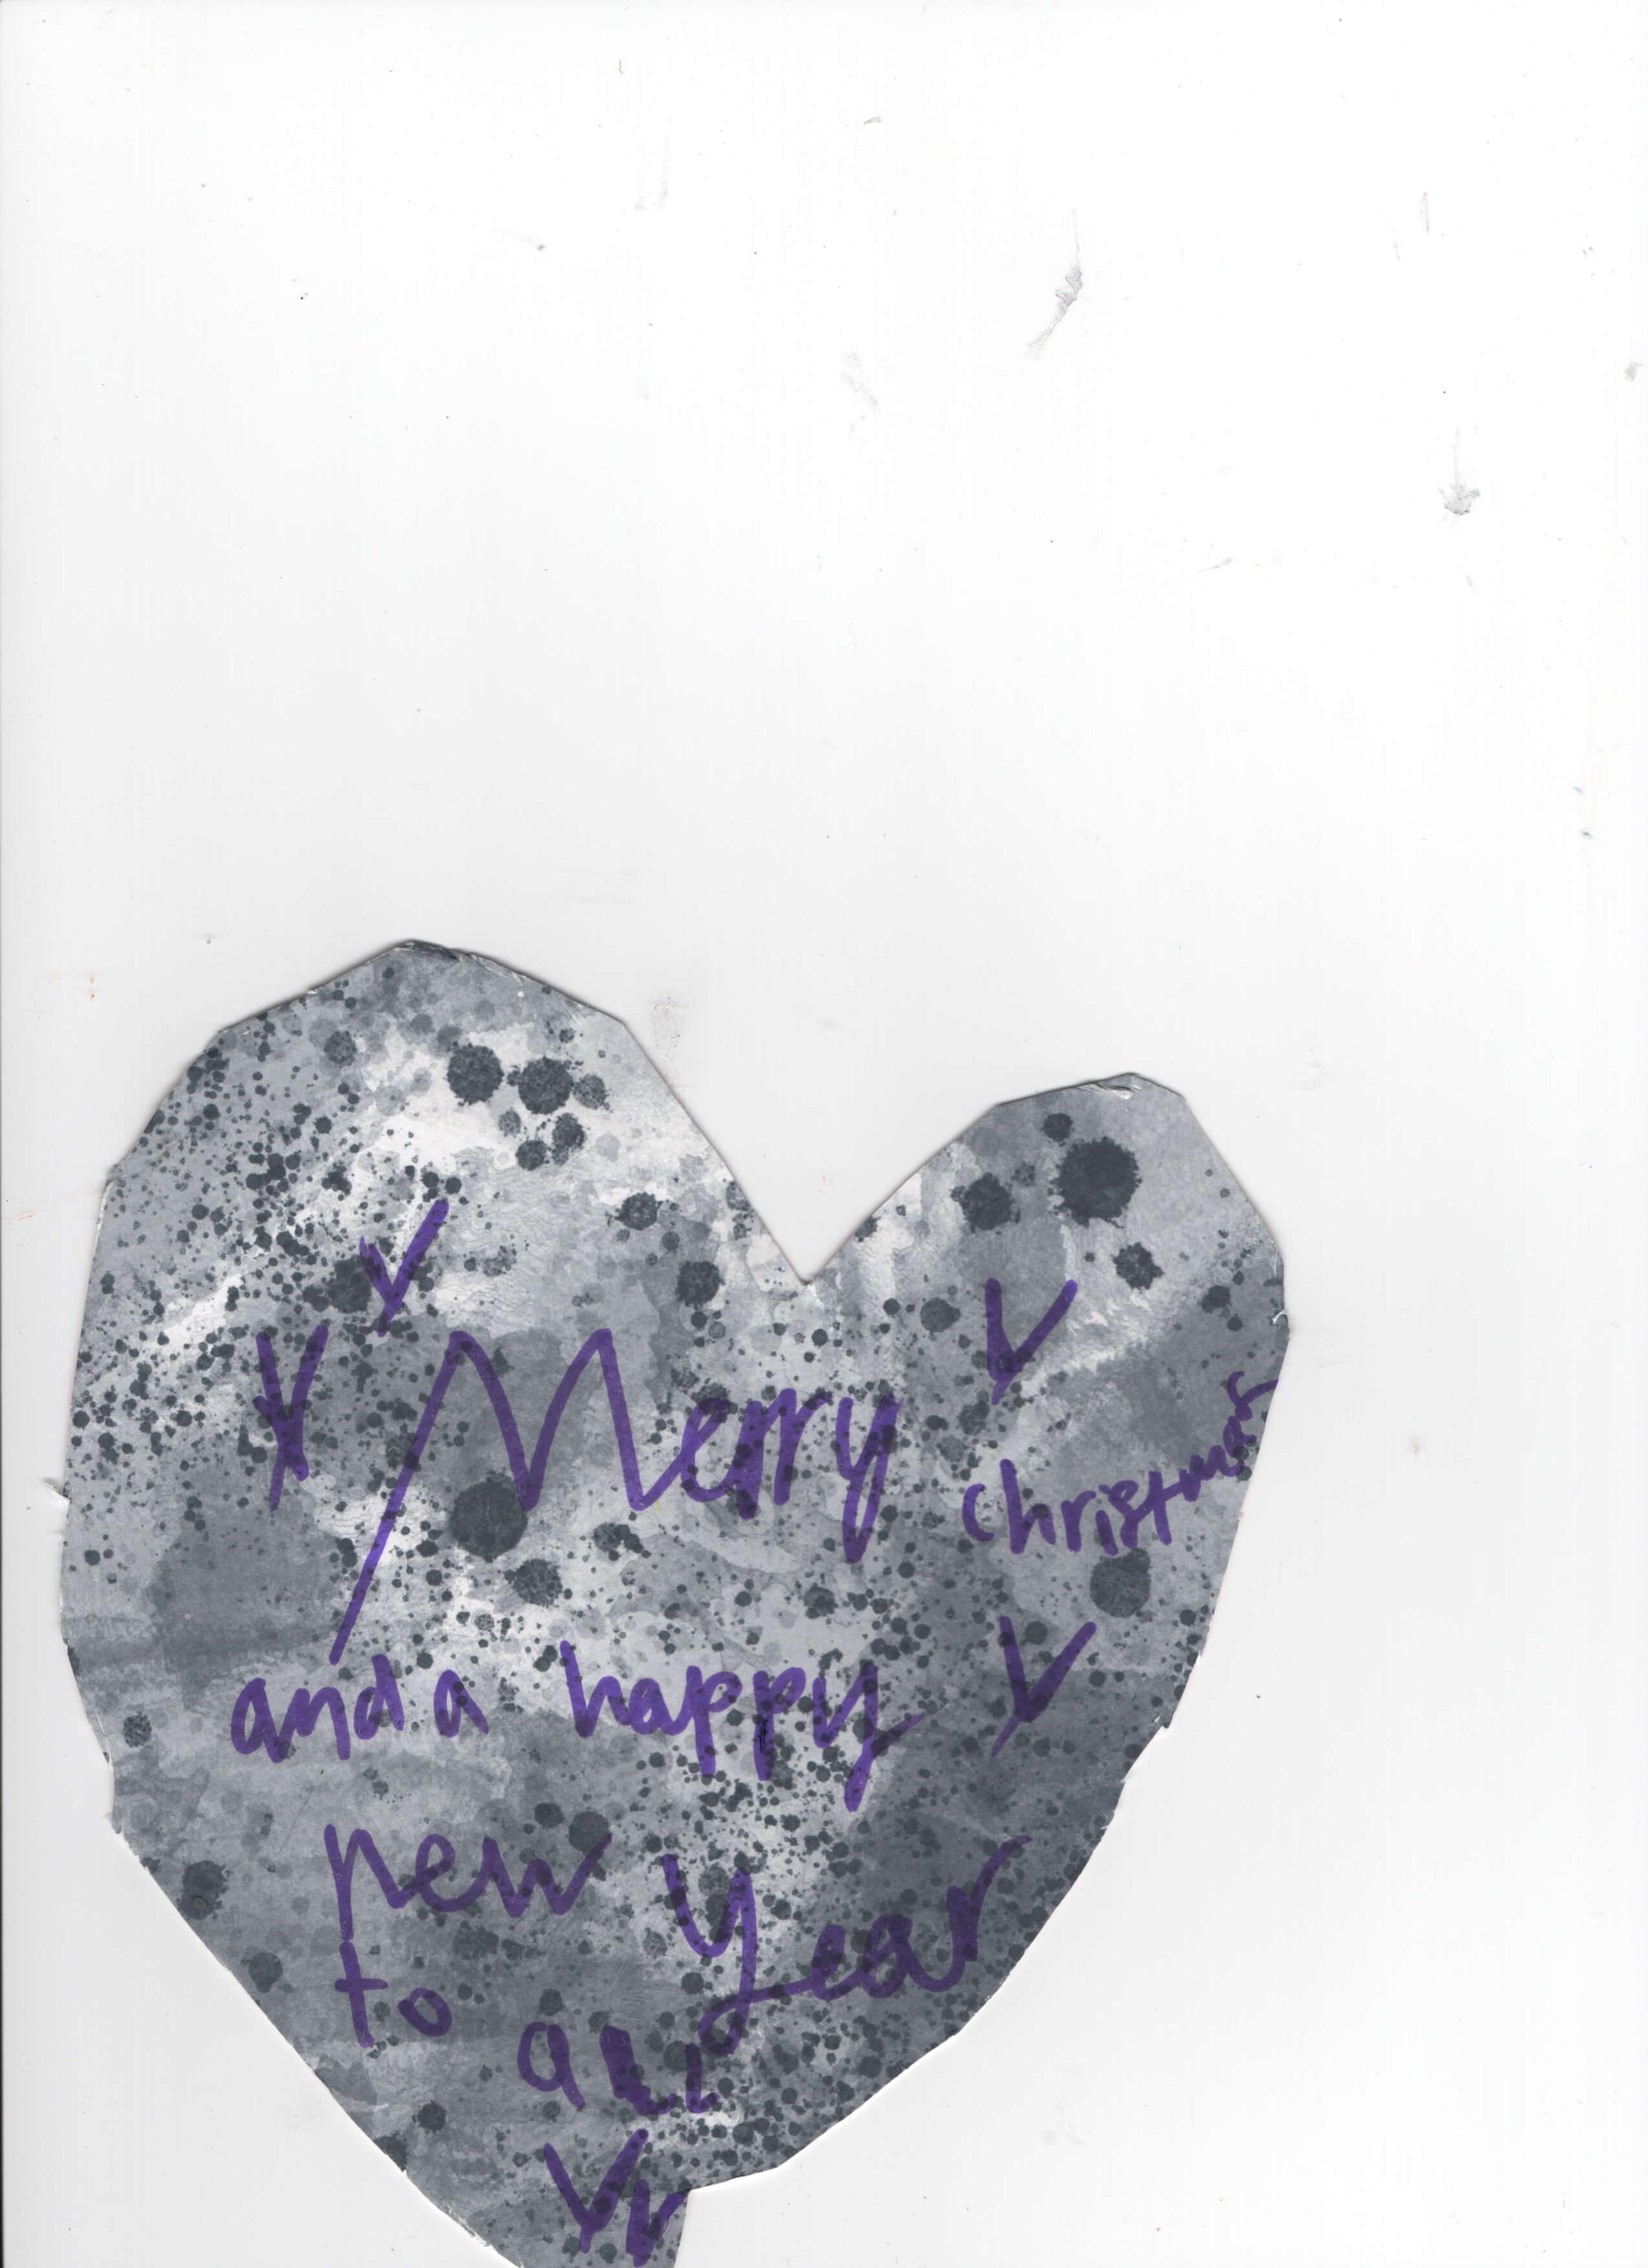 A gray cut-out heart with the words "Merry Christmas and Happy New Year to all".